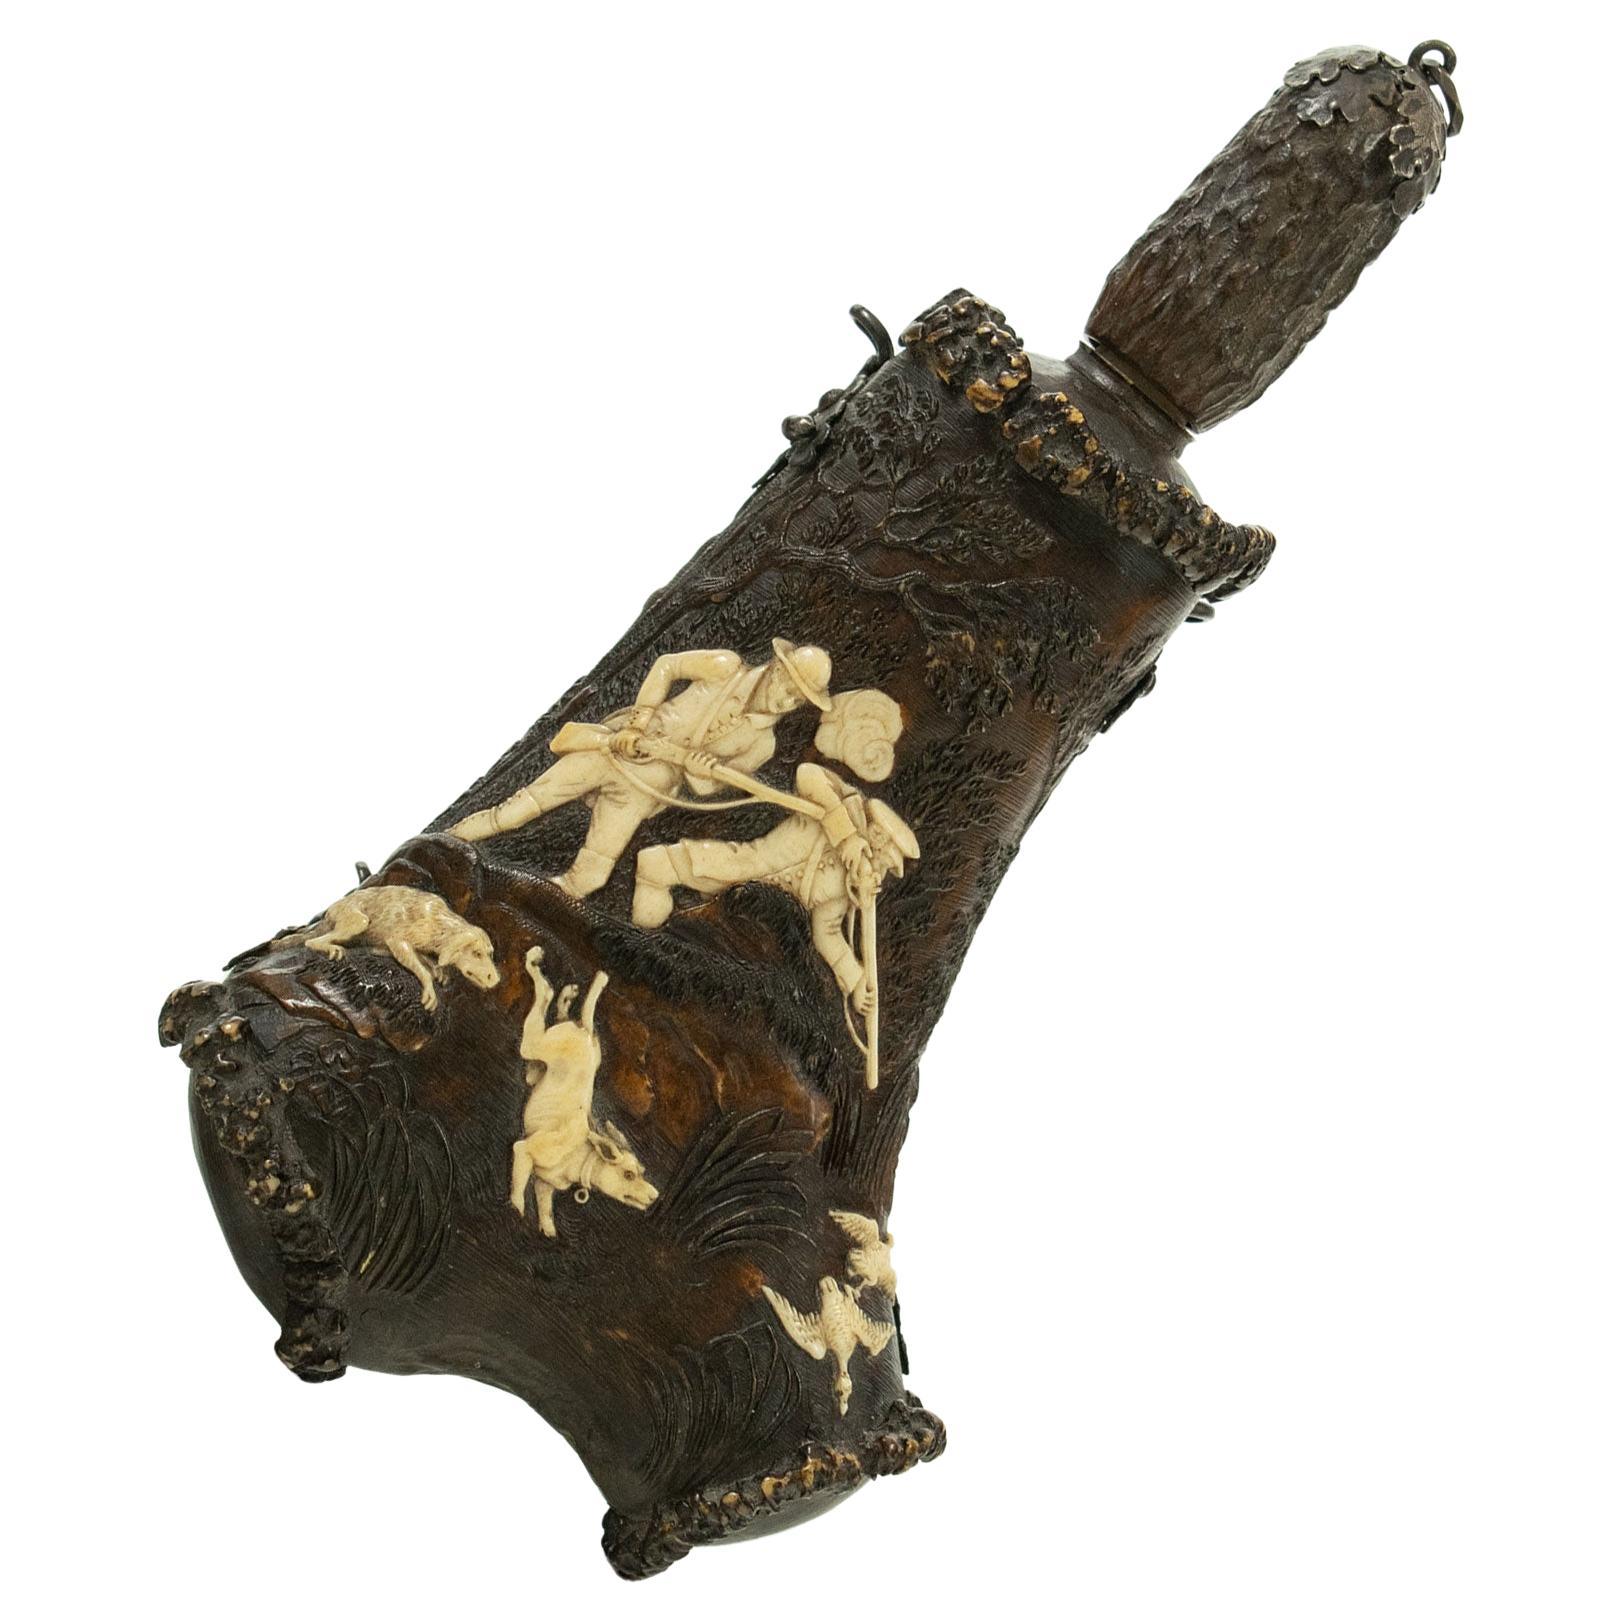 A FINE CARVED GERMAN OR AUSTRIAN 18TH CENTURY STAGS HORN POWDER FLASK - The front face expertly carved with two hunters in a wooded river bank scene with hounds and two flighting ducks, screw cut, bronze oak leaf mounted cap, turned horn nozzle and